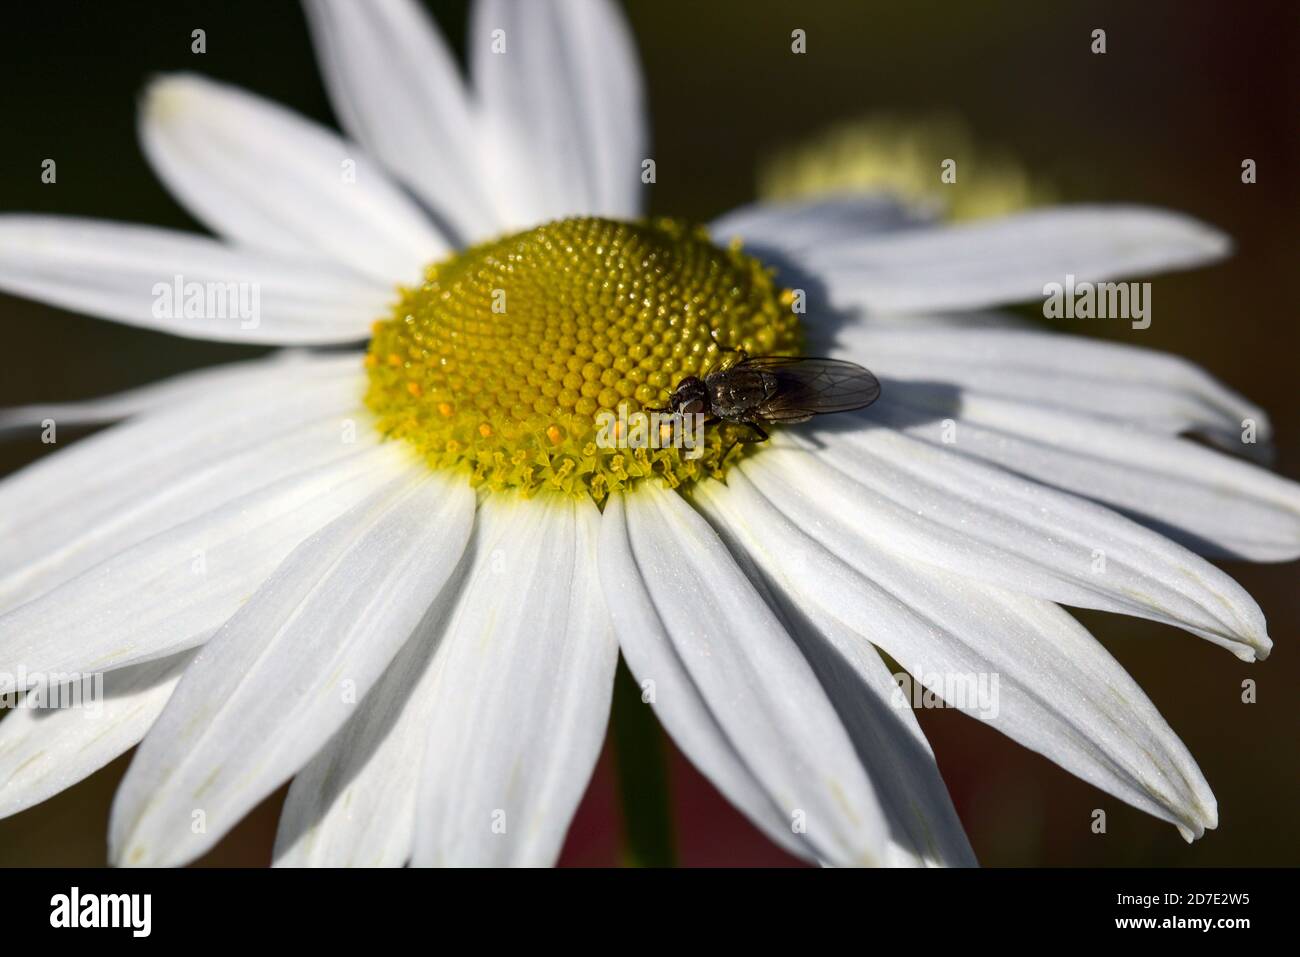 Daisy with a fly getting its pollen! Scotland. Photographed on nature Stock Photo